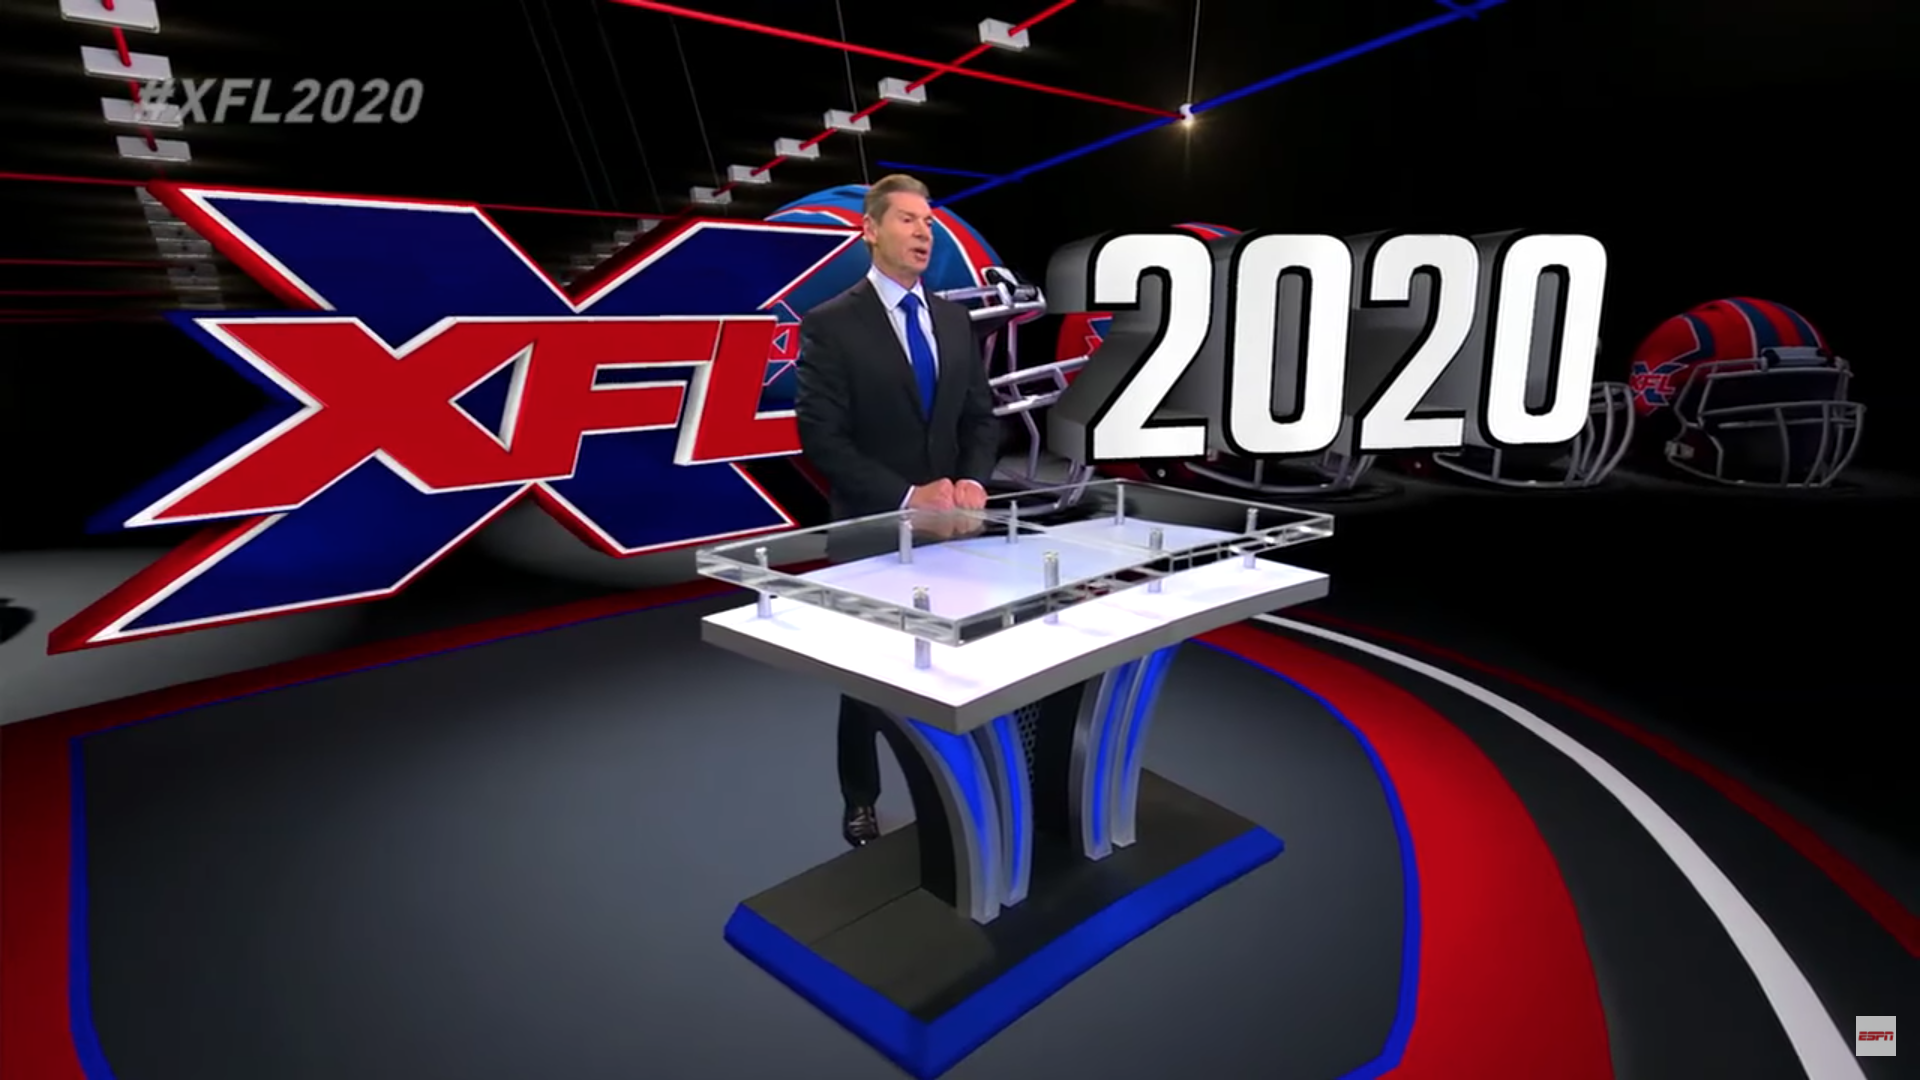 Vince McMahon introducing the XFL for 2020. Photo by: ESPN / YouTube